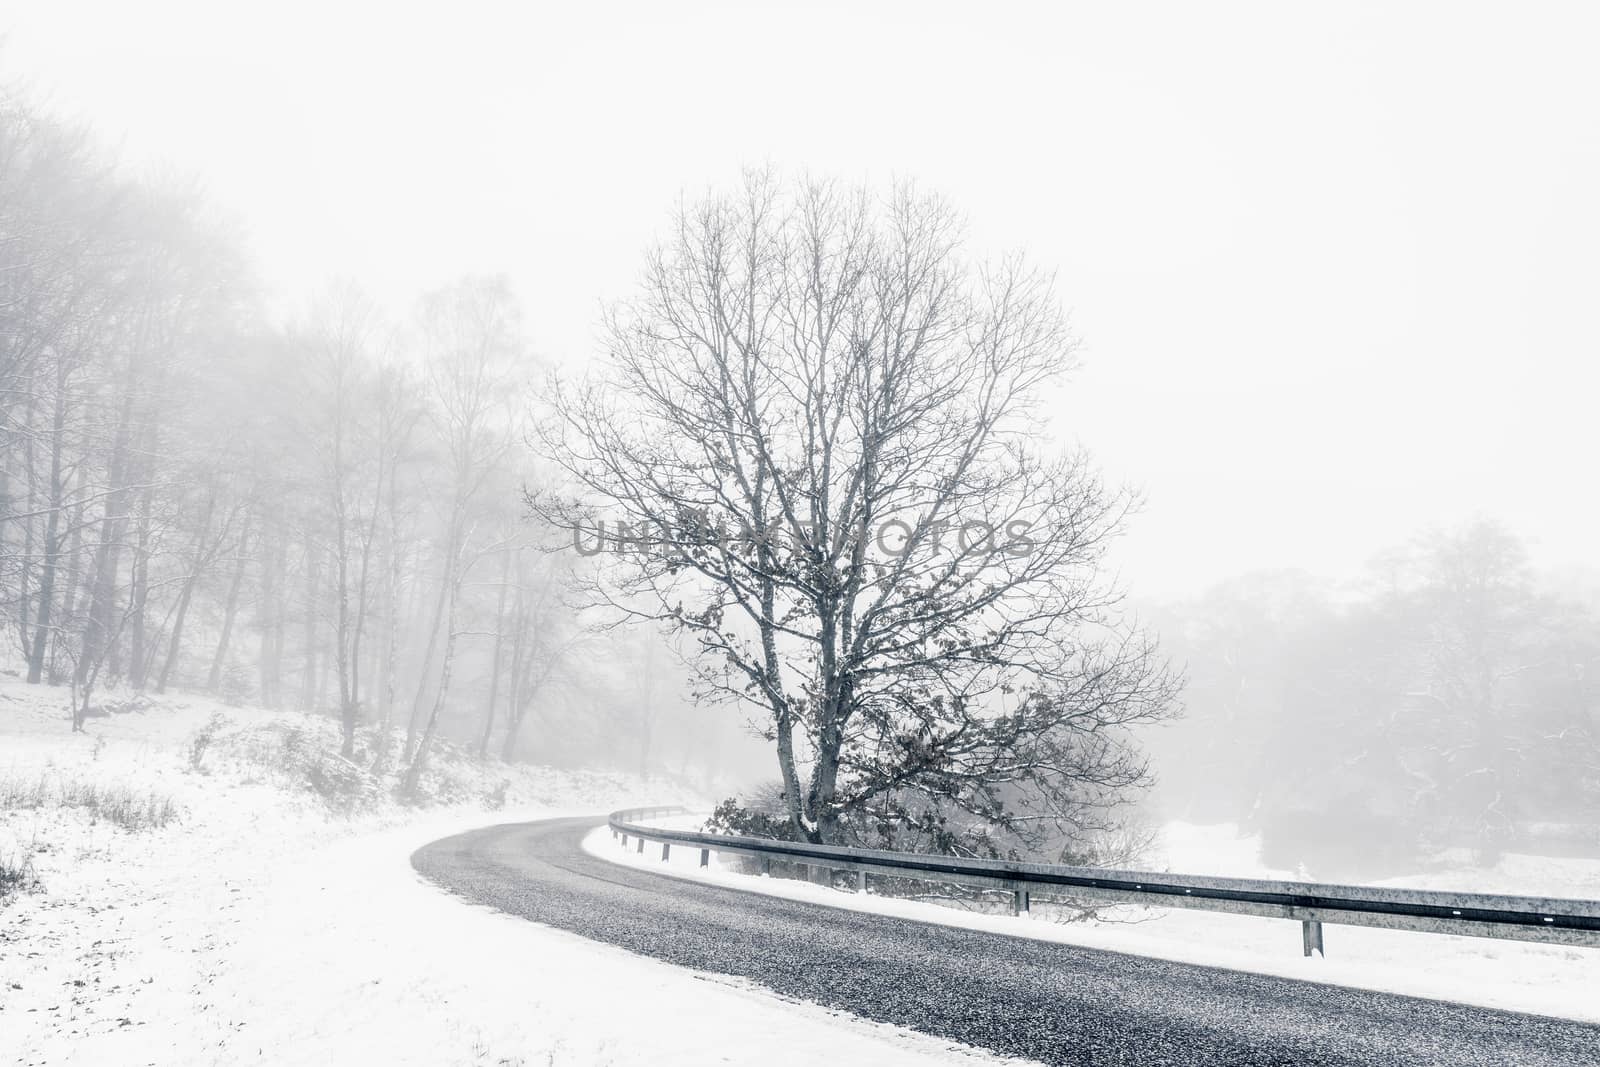 Lonely tree in a highway curve in the winter with snow and misty weather conditions